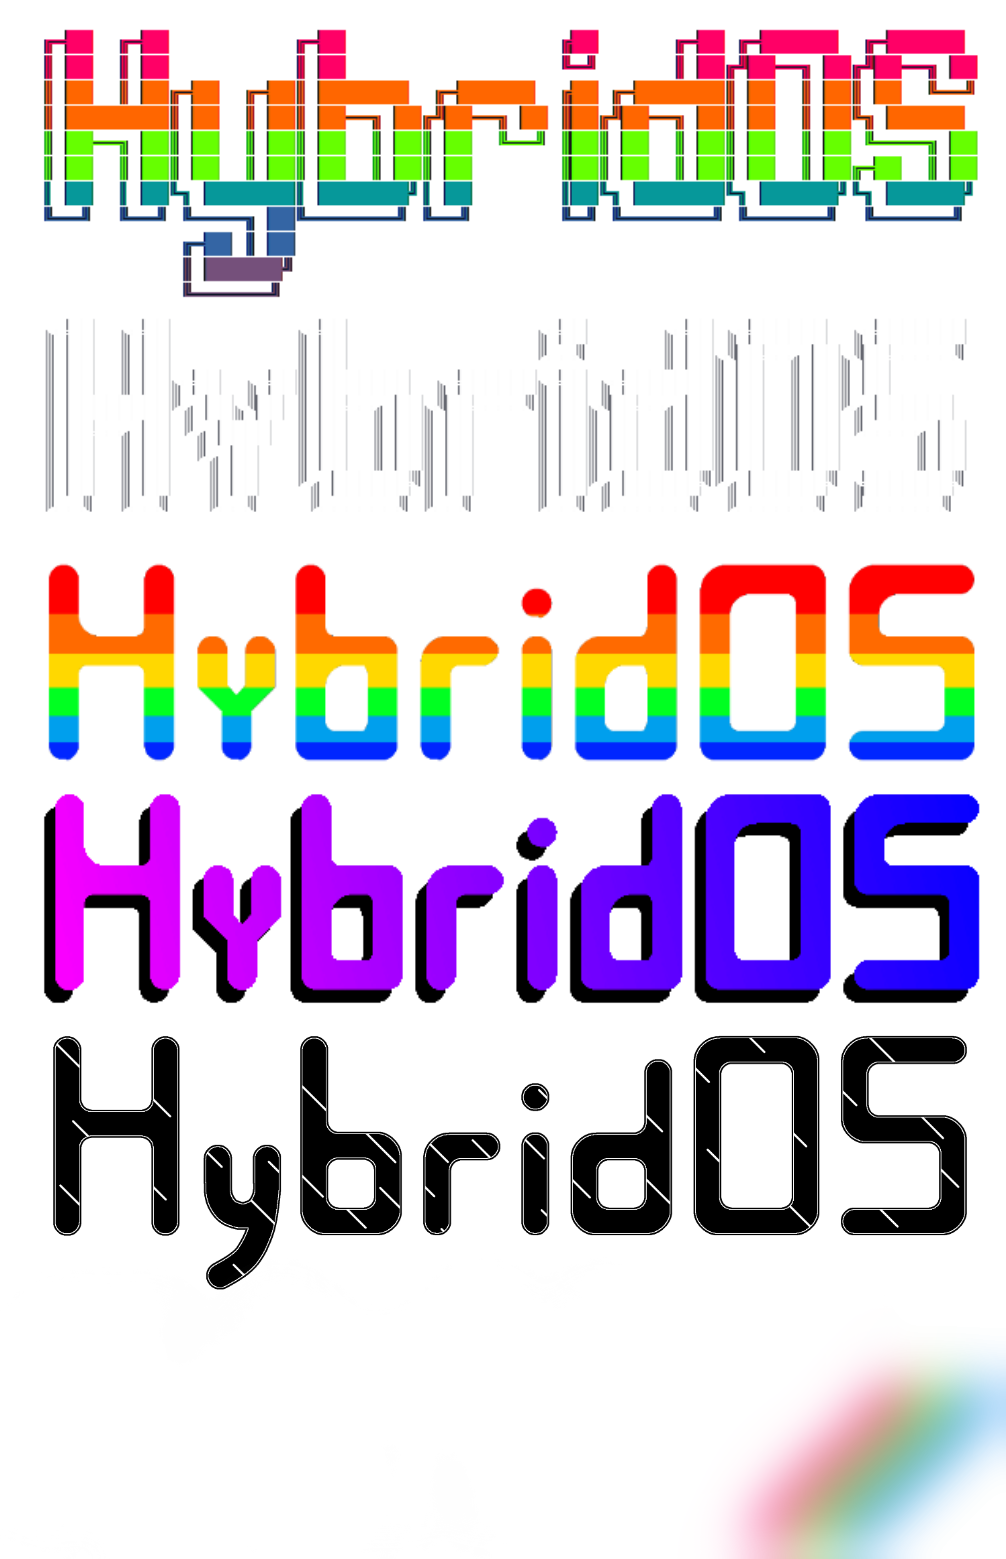 6 different HybridOS Logos throughout the versions